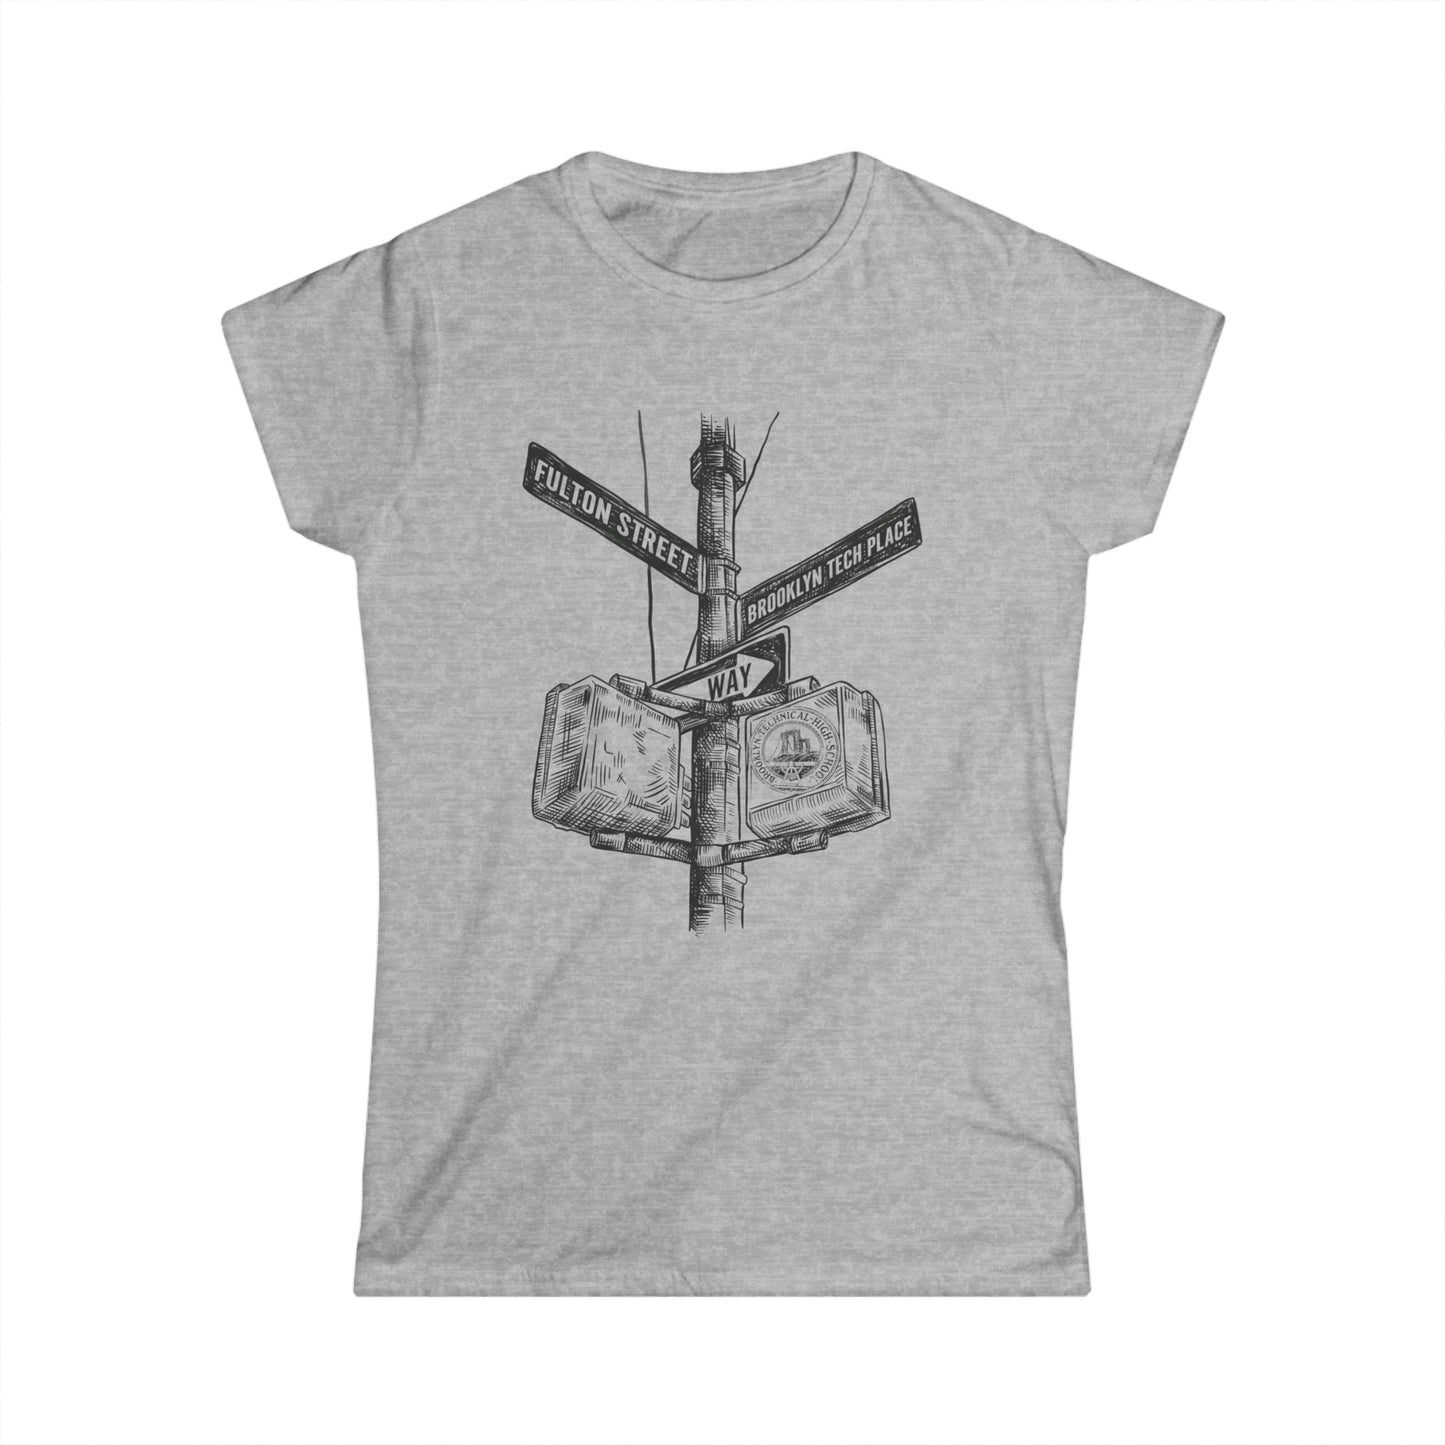 Boutique - Fulton St & Brooklyn Tech Pl - Ladies Softstyle T-Shirt